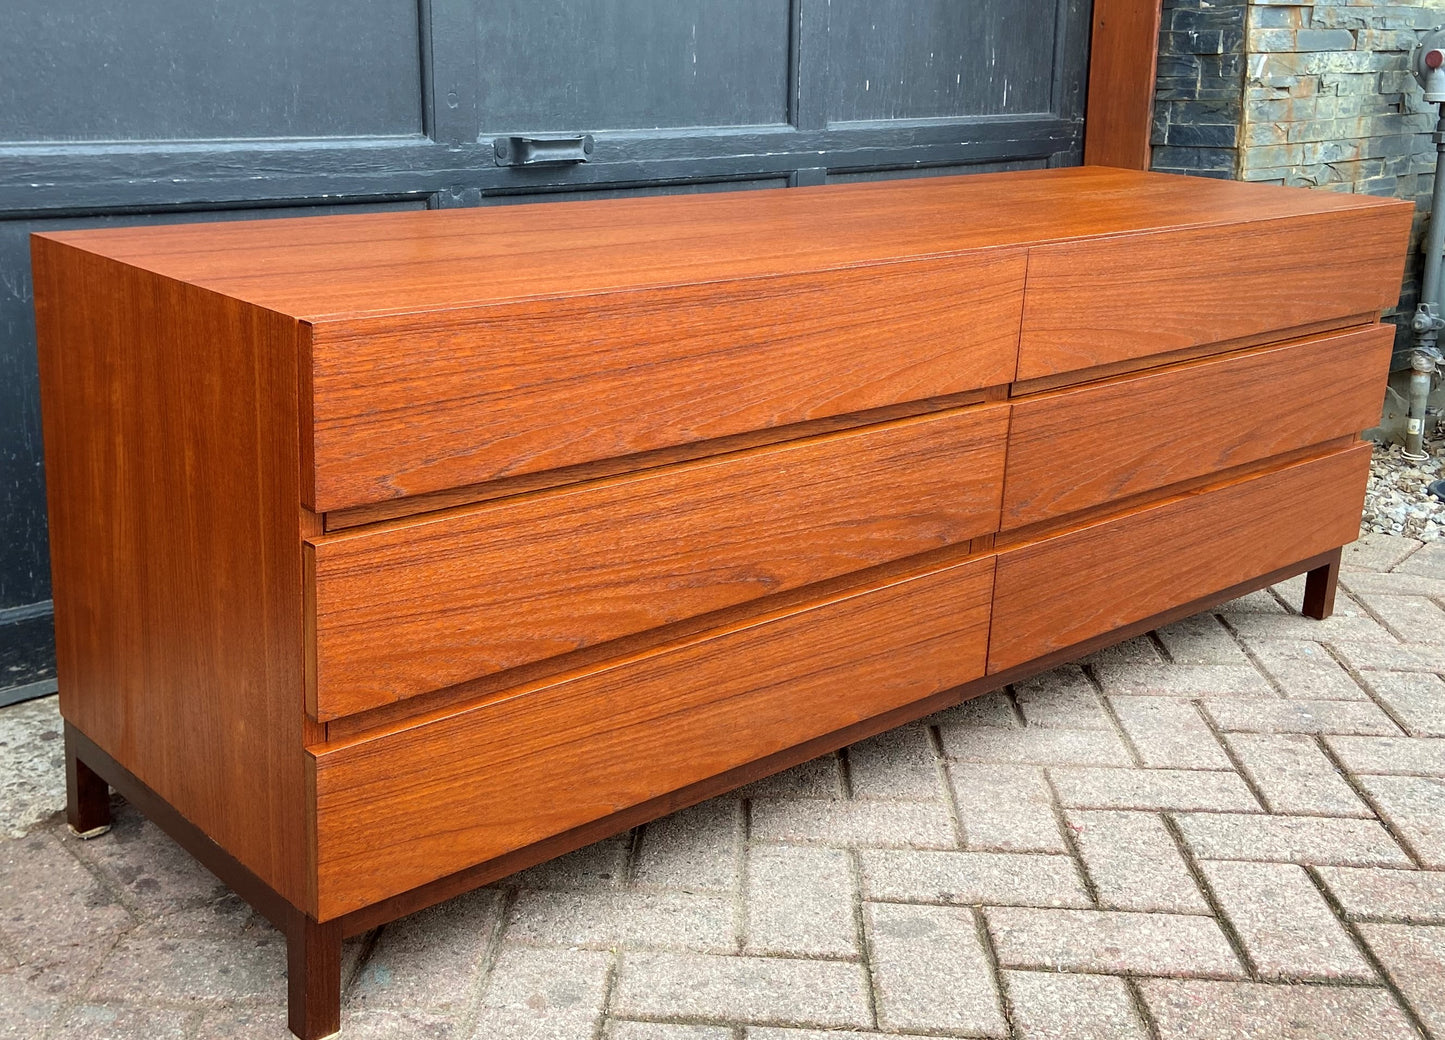 REFINISHED MCM Teak w Rosewood Low Dresser/ TV Console by Reff/ Knoll, 63" PERFECT